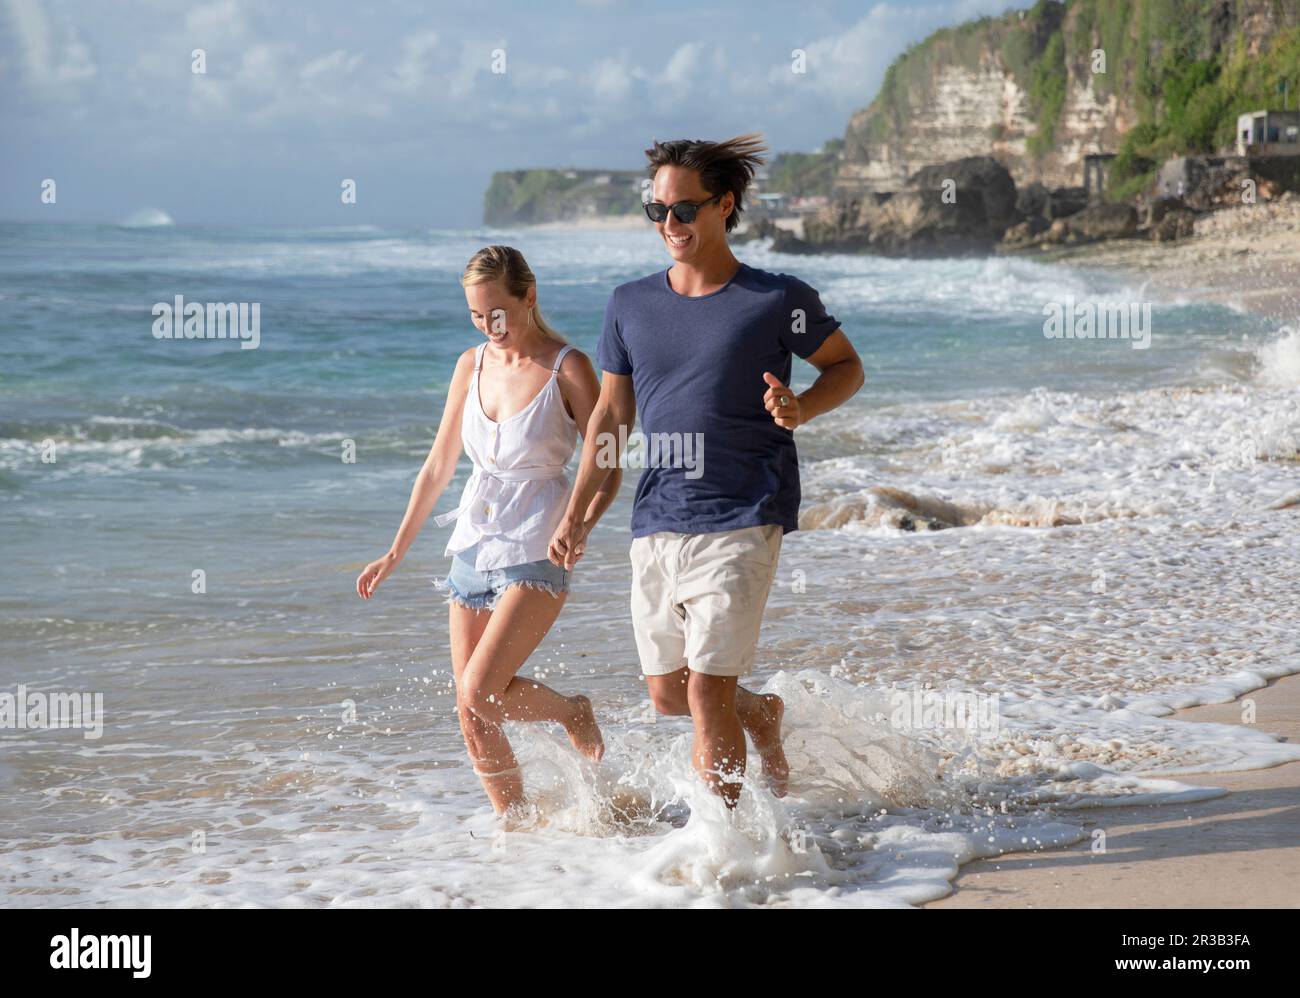 Happy young couple running in sea water at beach Stock Photo